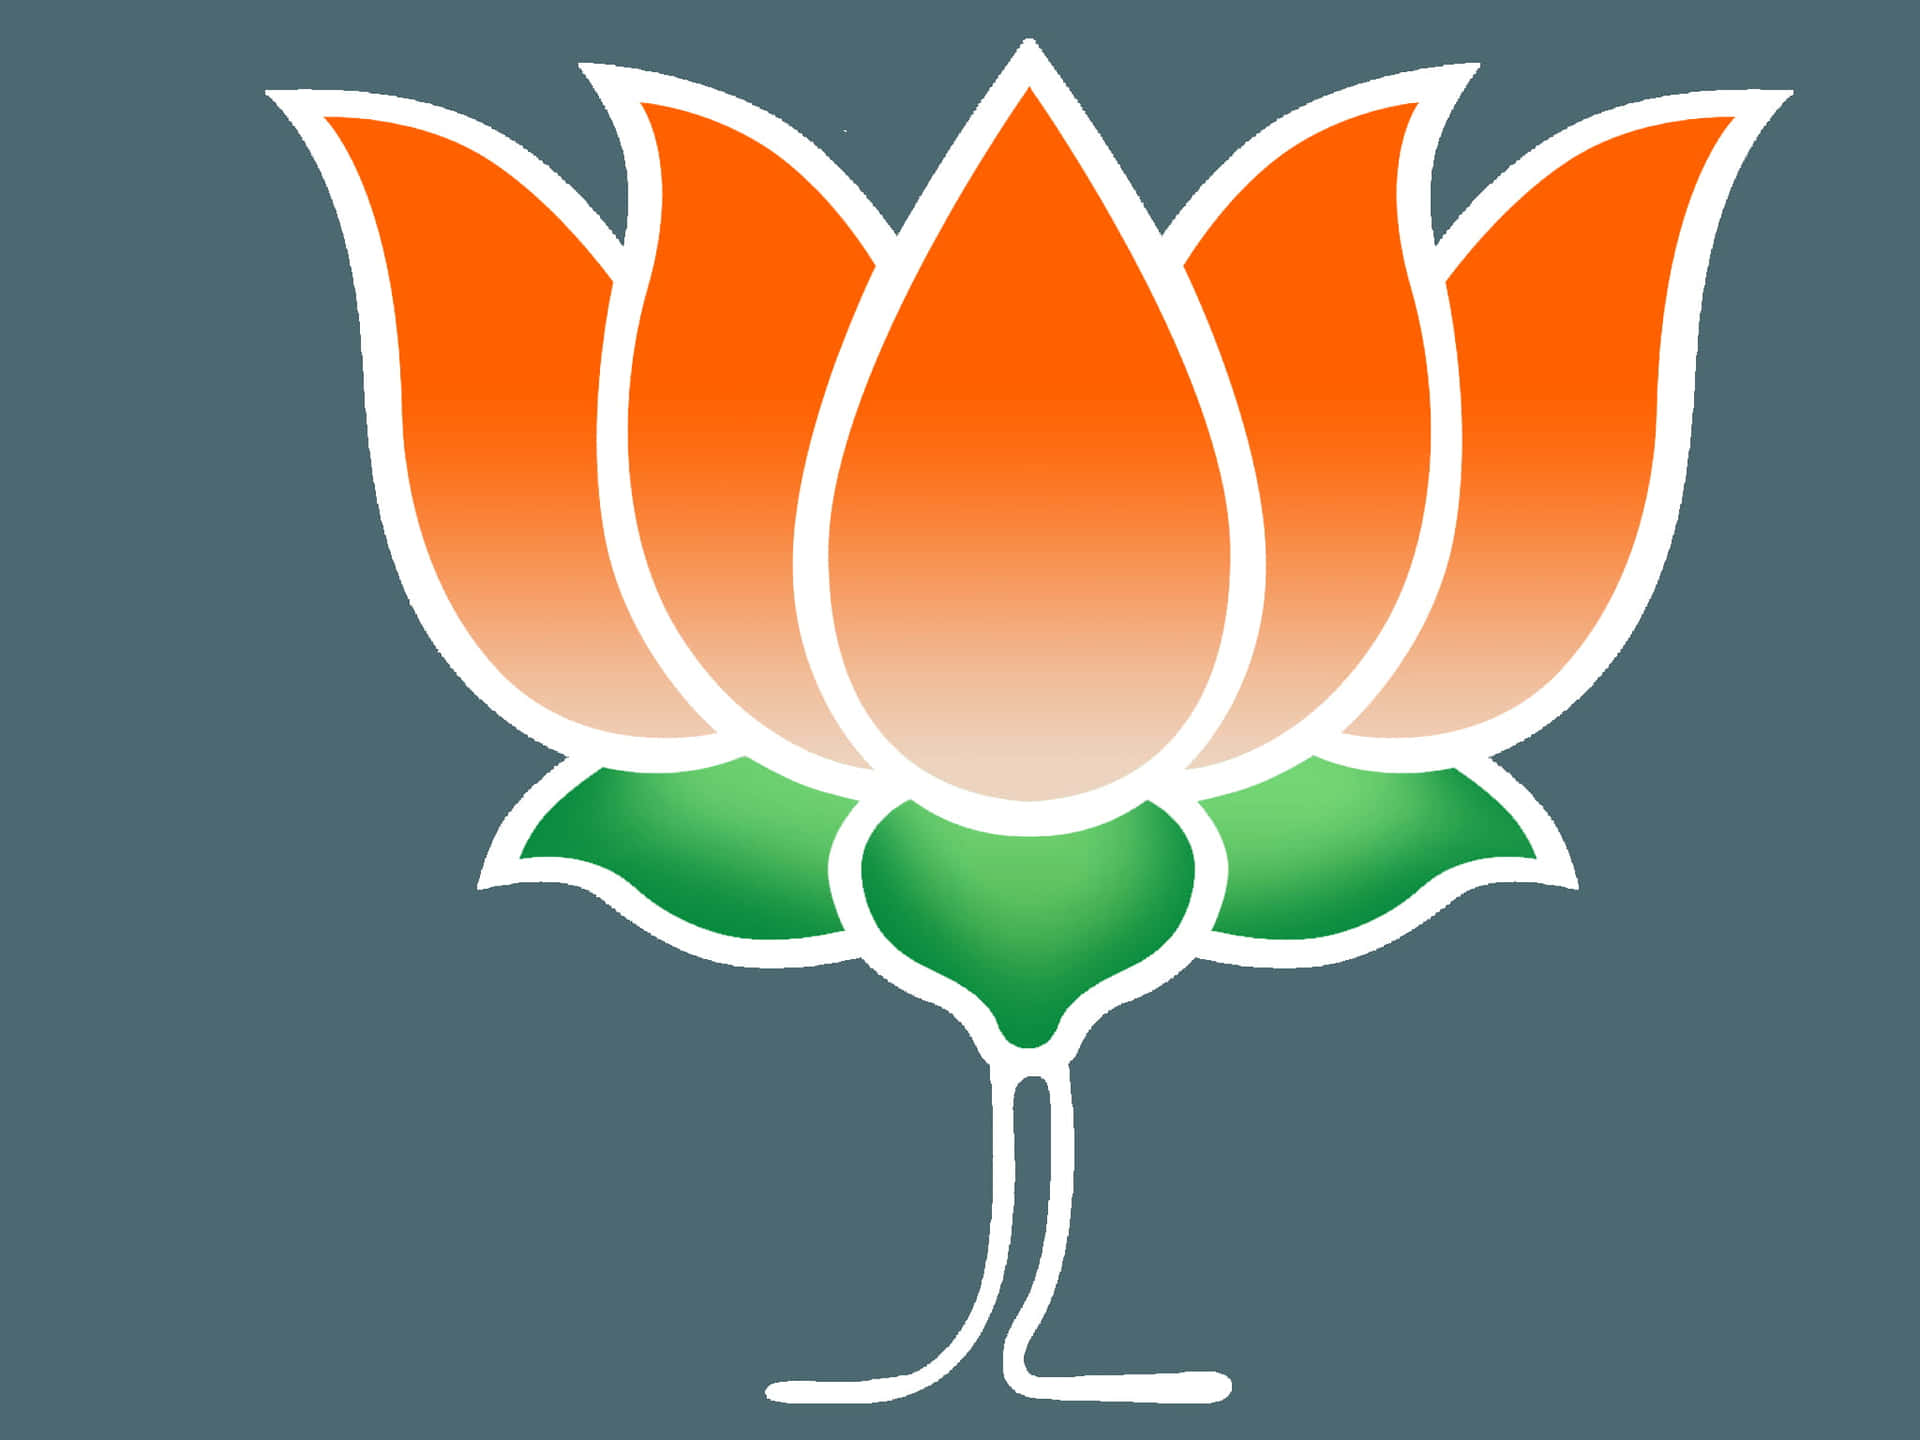 BJP Party strives for a the social and economic development of India